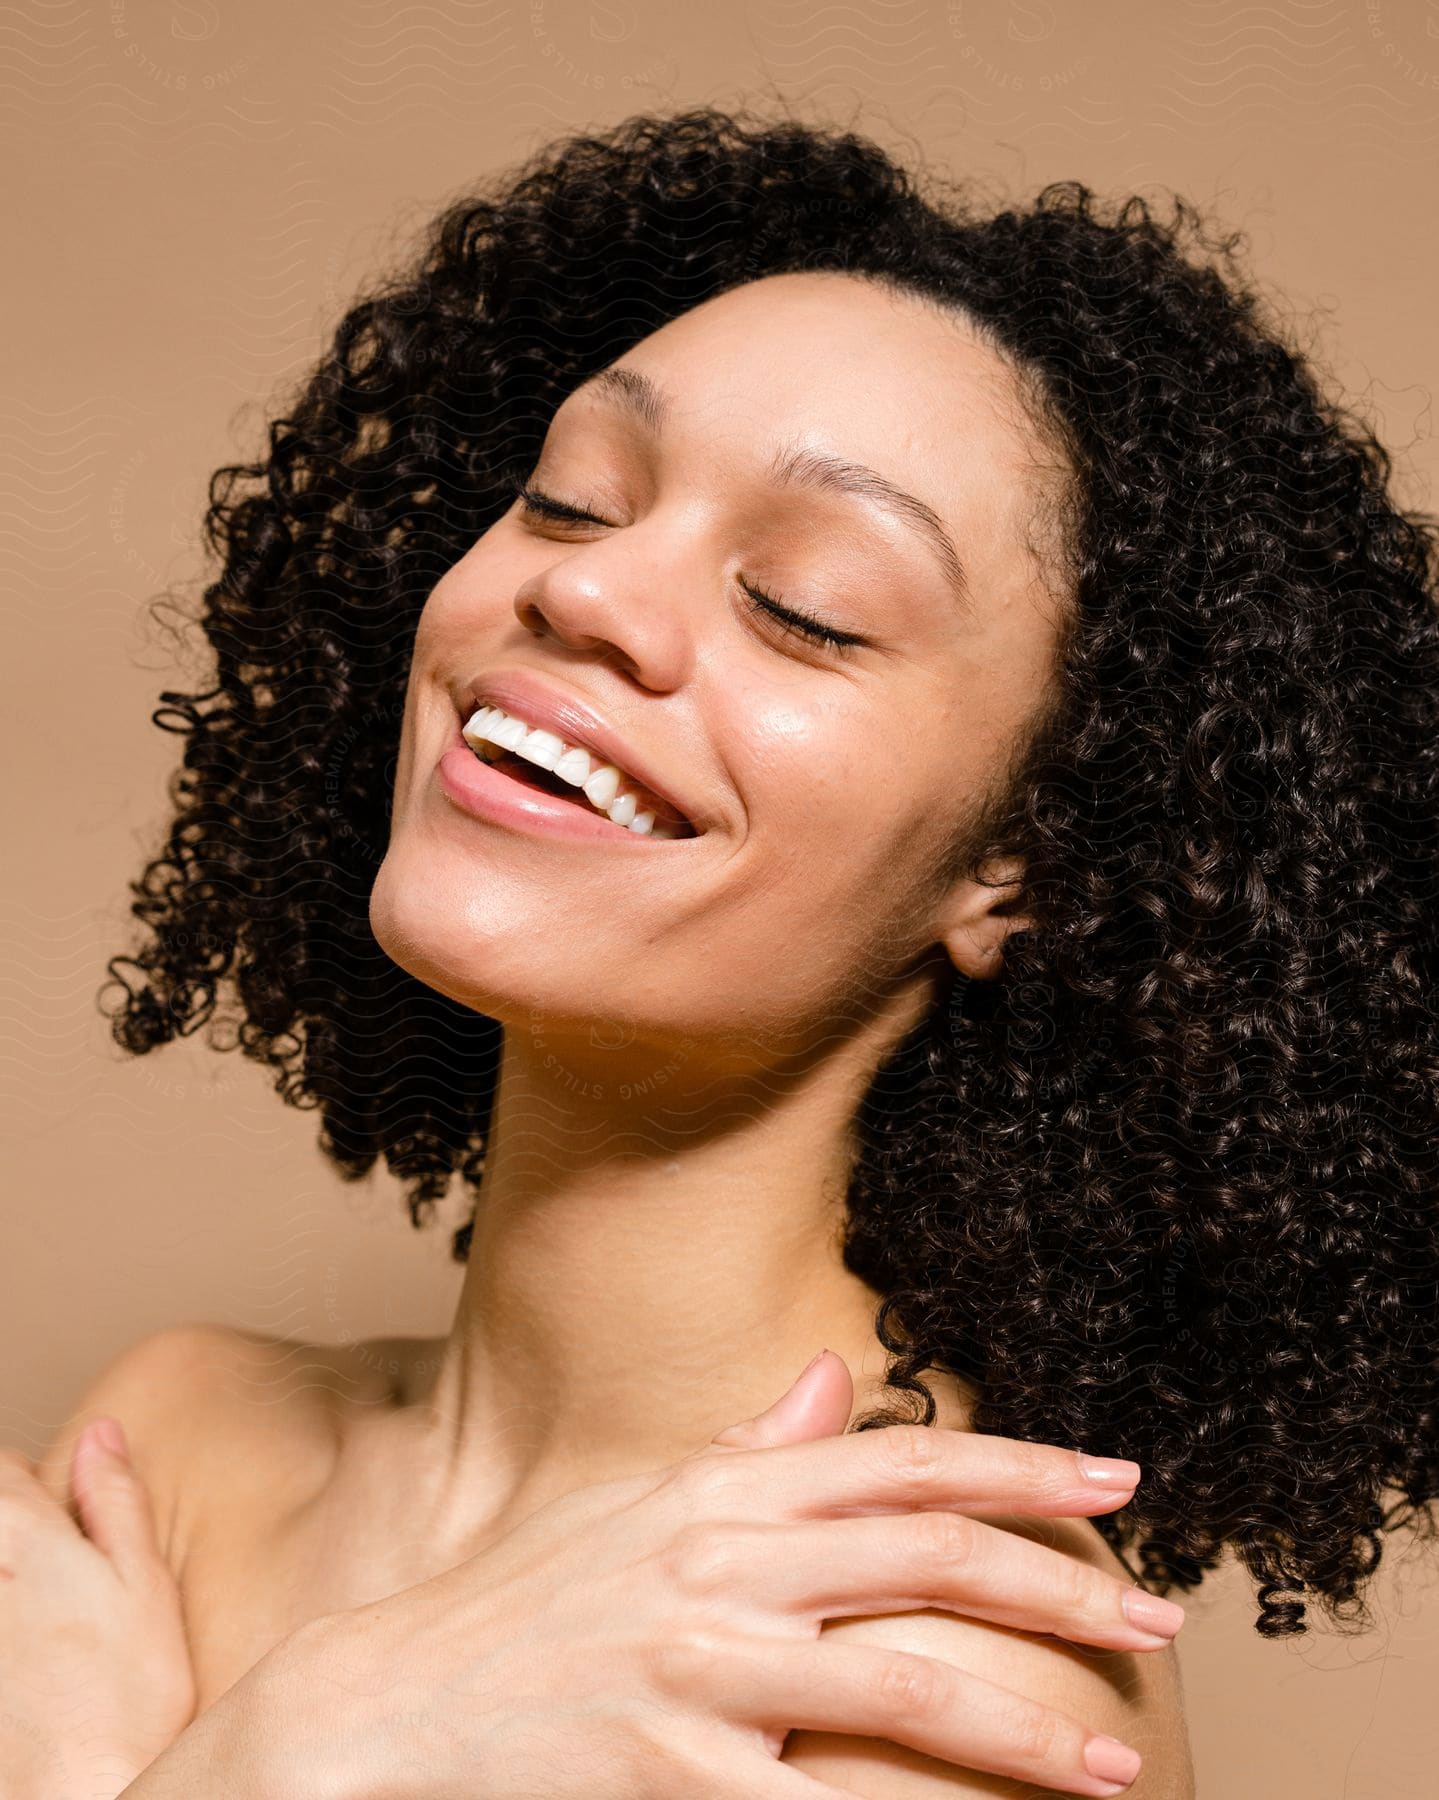 Woman smiling with her eyes closed and hands on her bare shoulders